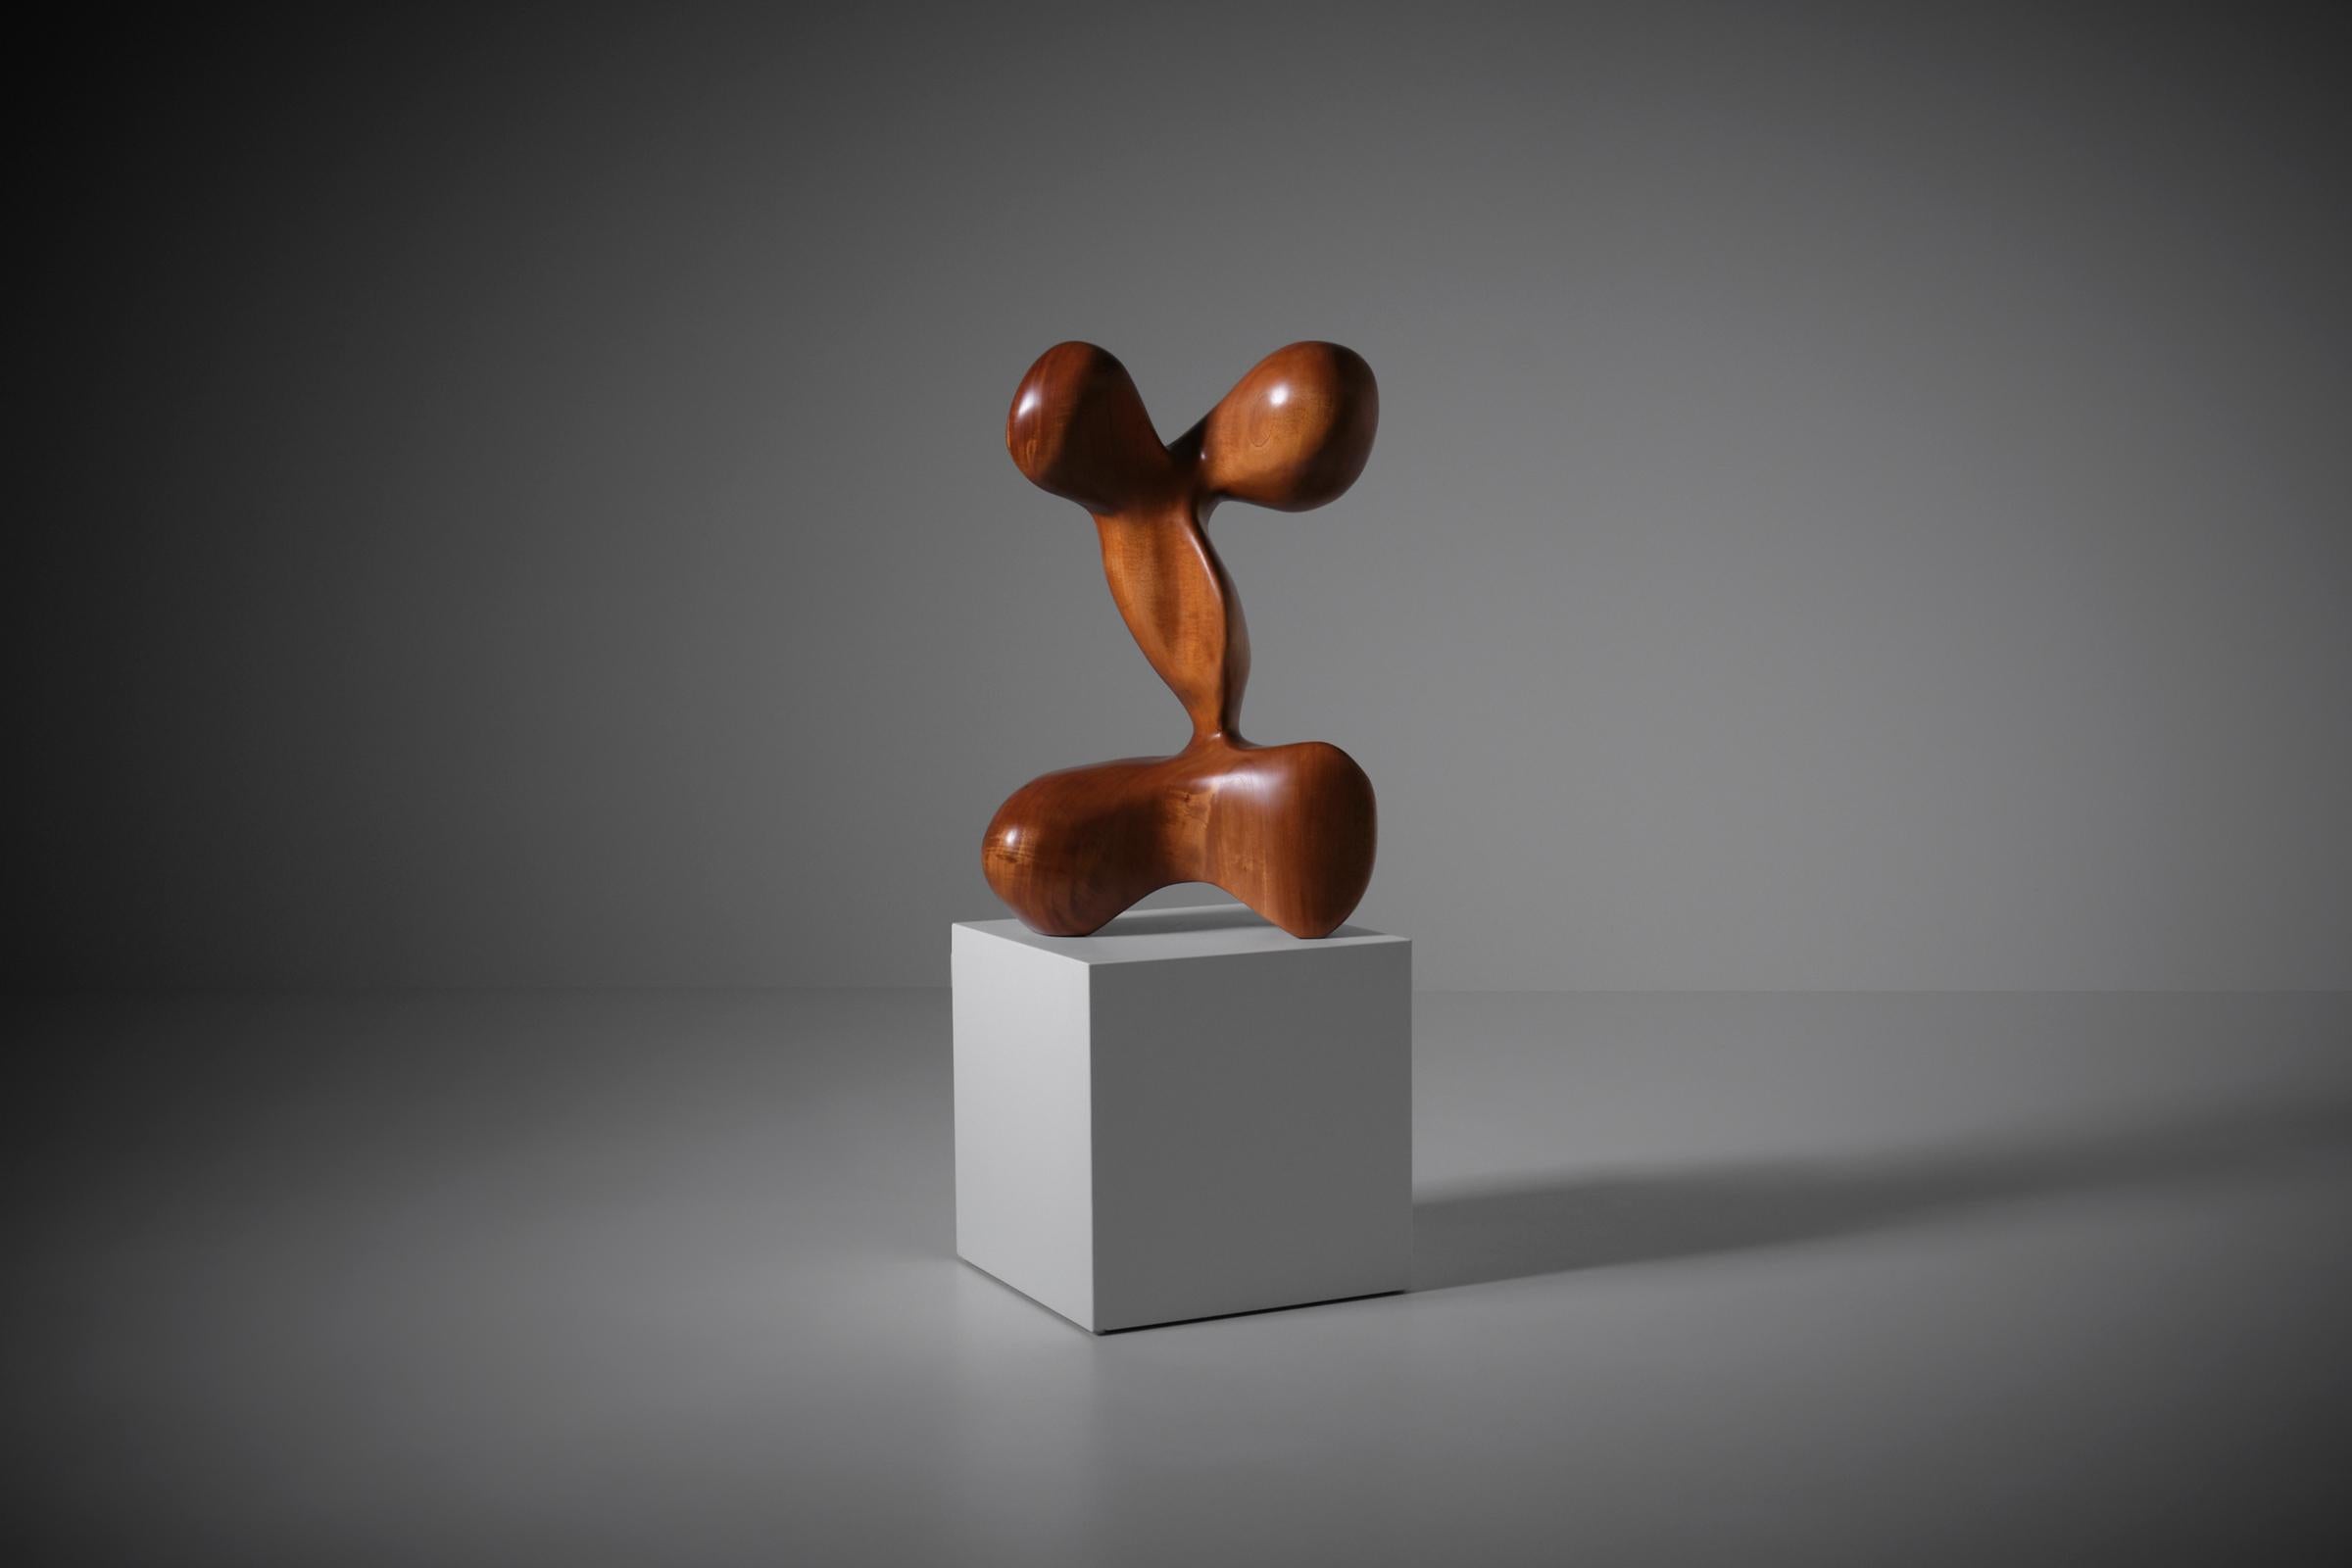 Abstract Iroko wooden sculpture, Italy 1960s. Beautifully hand-carved out of one piece of solid Iroko wood. Strong and interesting shapes show the refined skills of the artist. The sculpture is in excellent original condition.